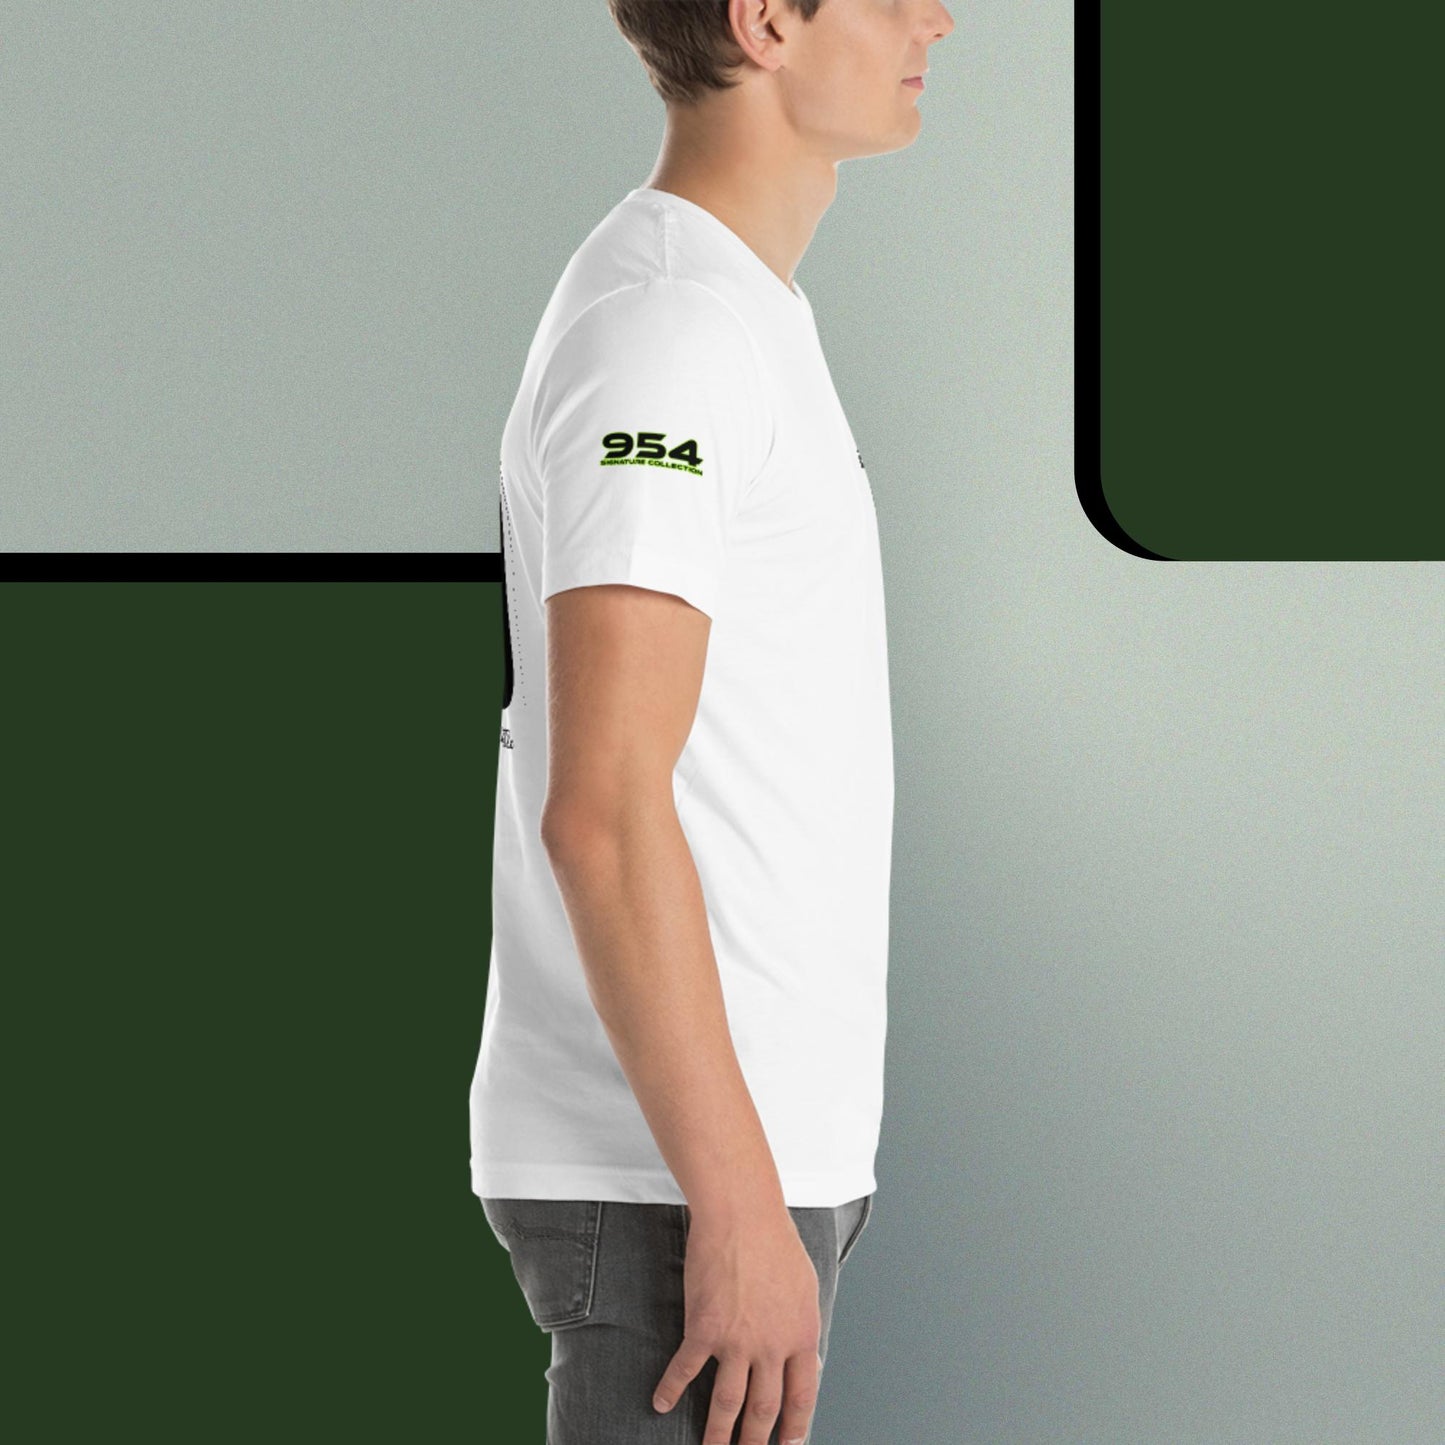 Take With You 954 Collection Unisex t-shirt